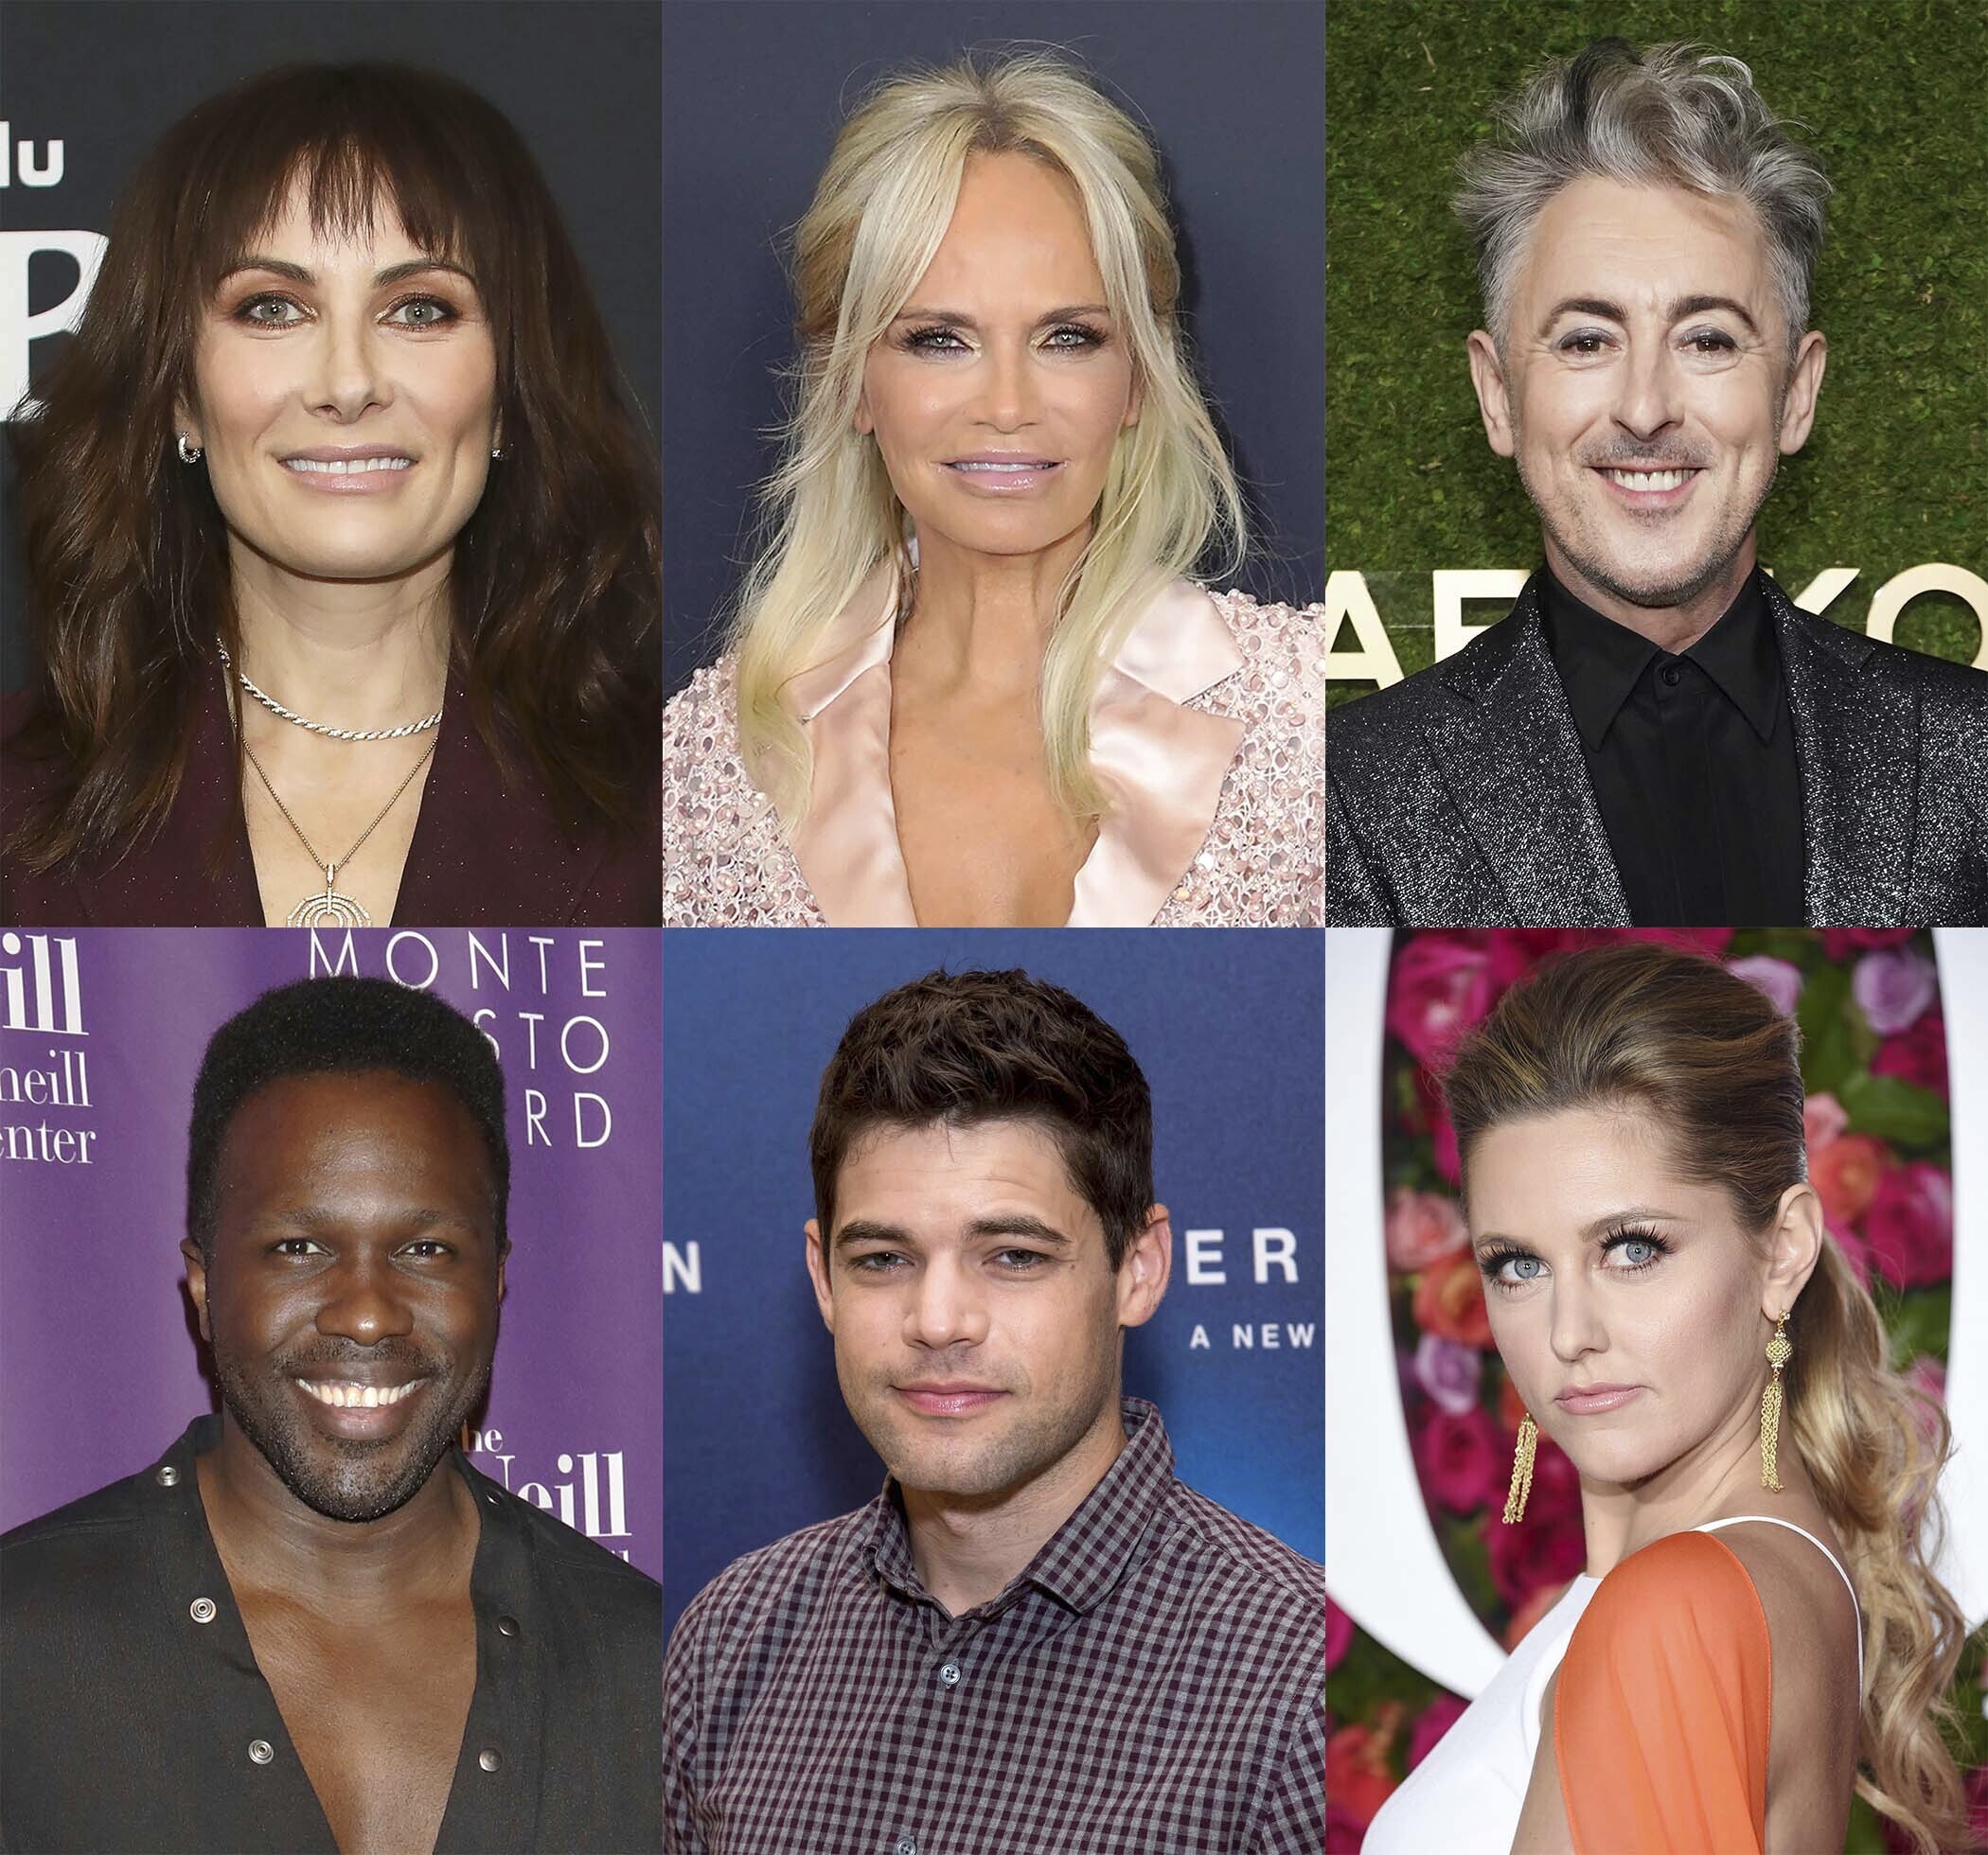 Top row from left, Laura Benanti, Kristin Chenoweth, Alan Cumming, bottom row from left, Joshua Henry,  Jeremy Jordan and Taylor Louderman, who will take part in The Broadway Cruise